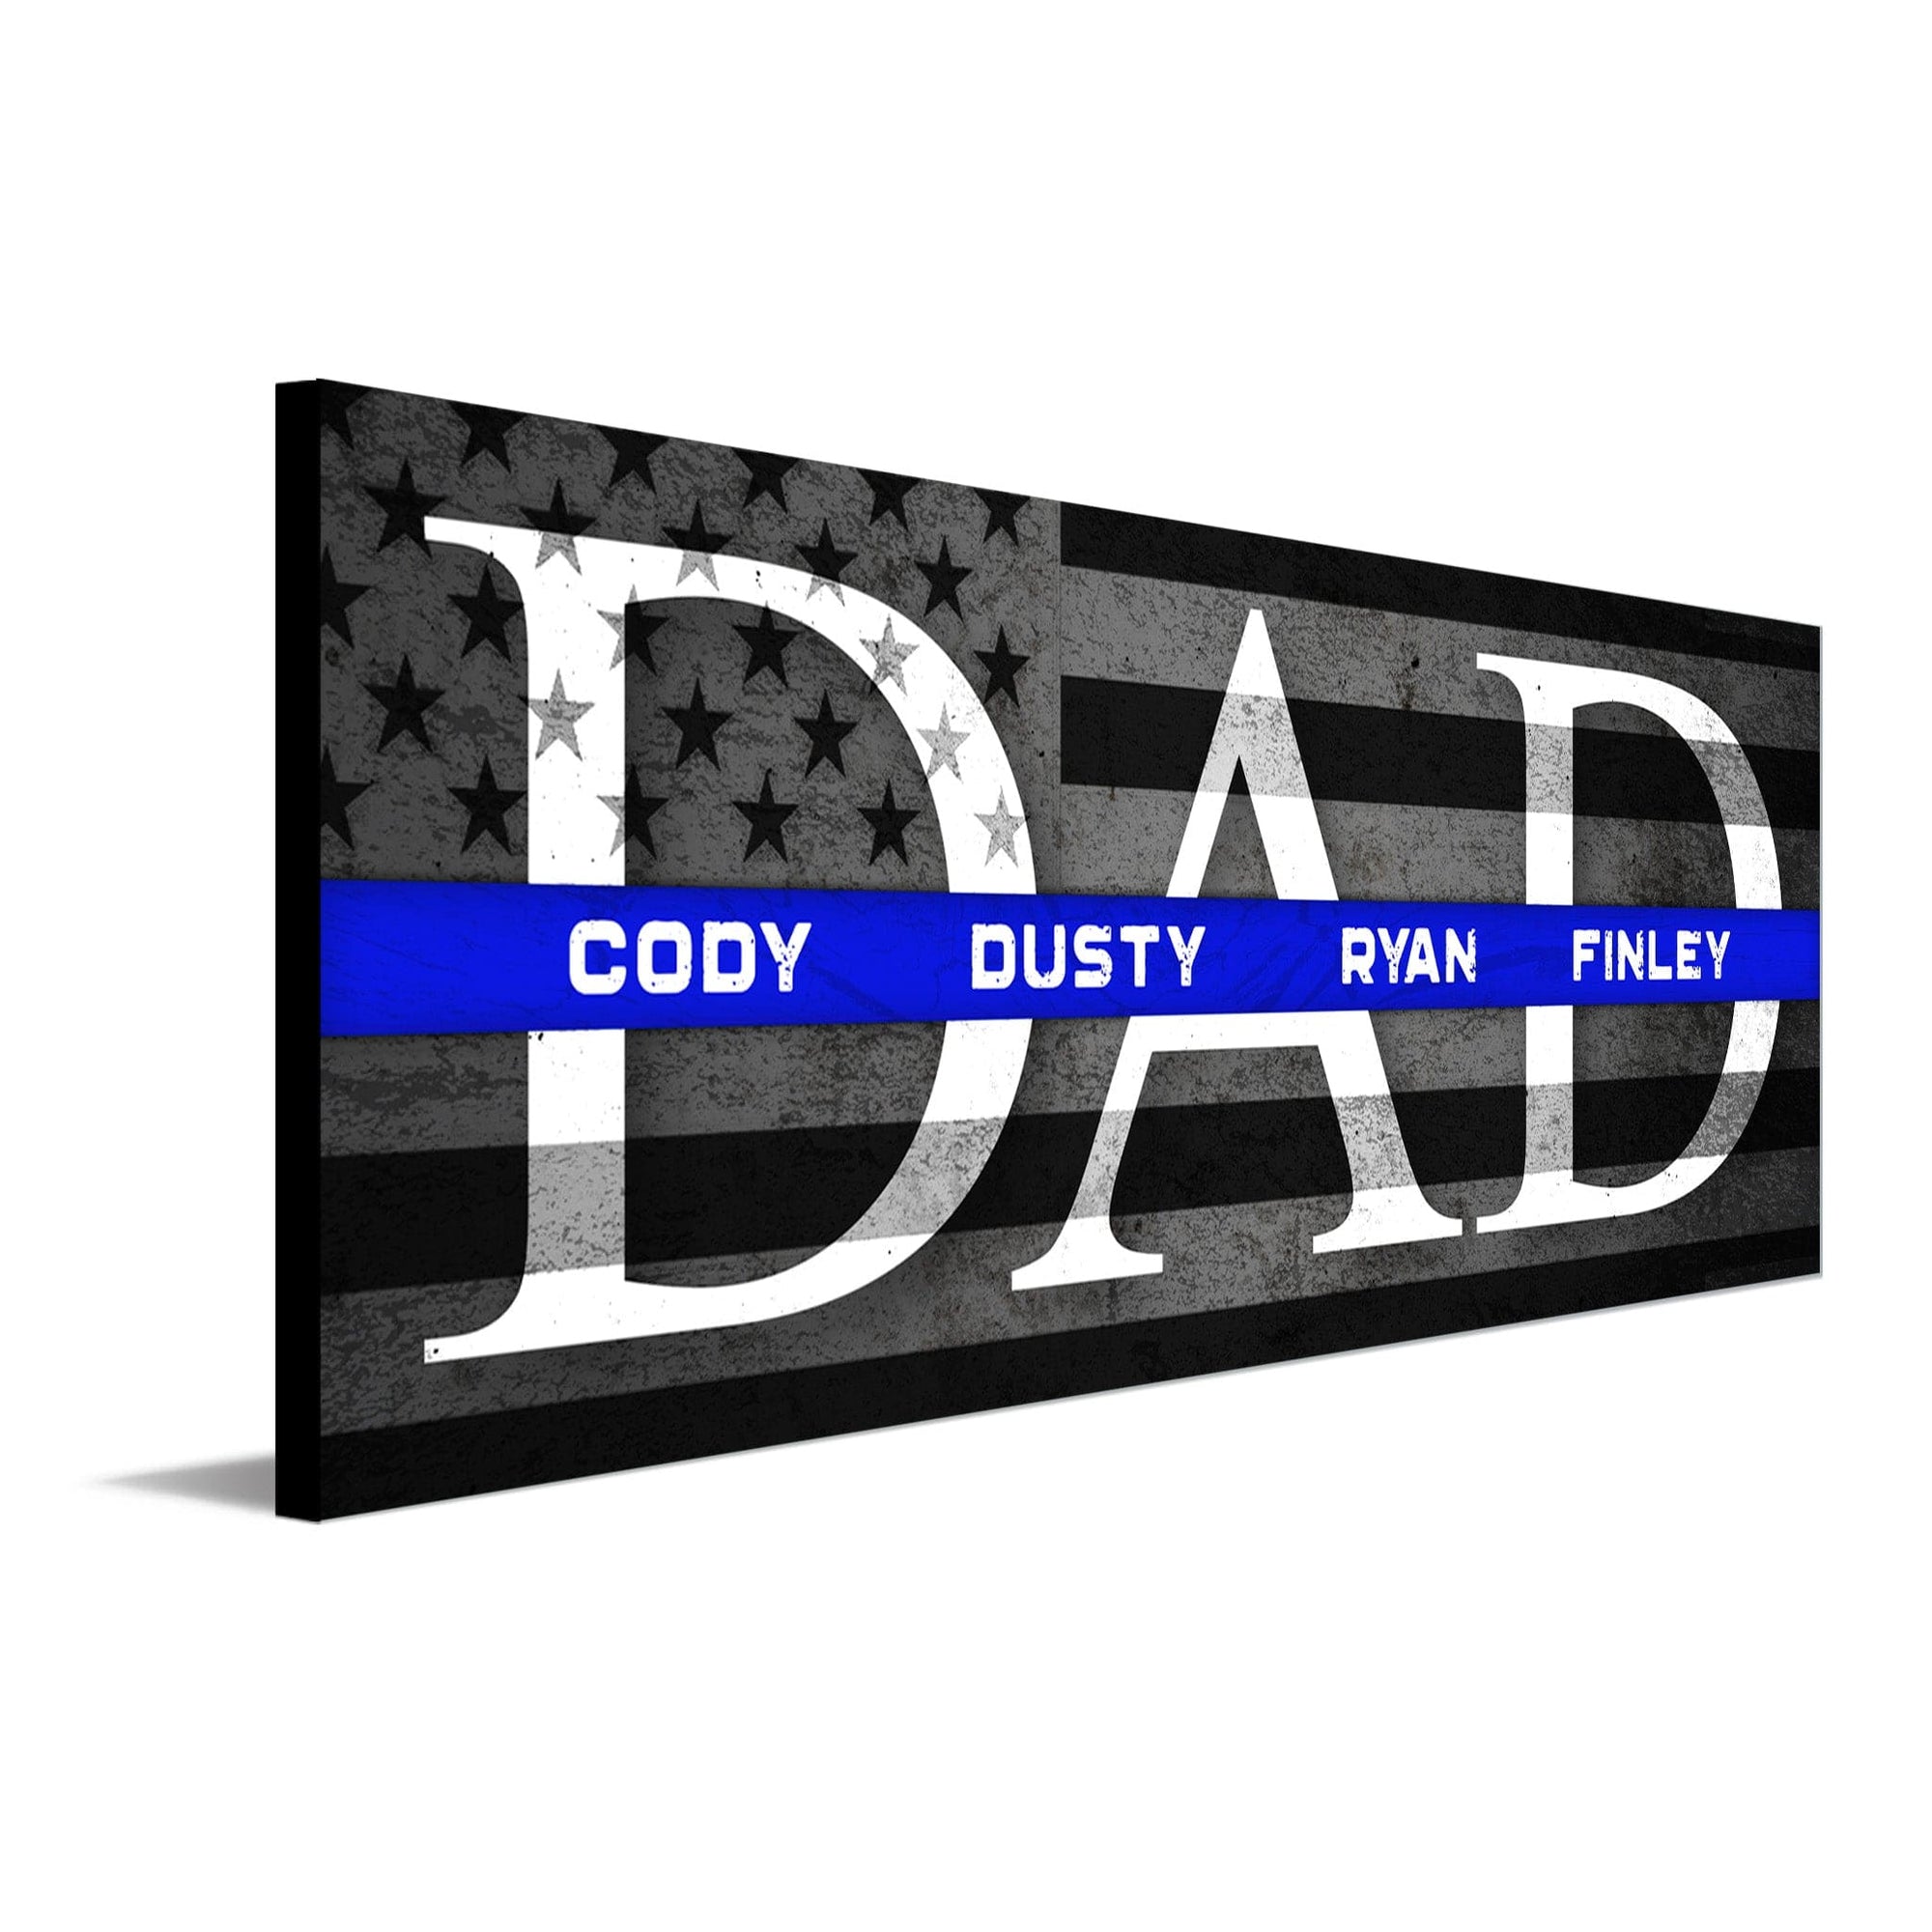 Personalized gift for Dad - block mount option with thin blue line shown